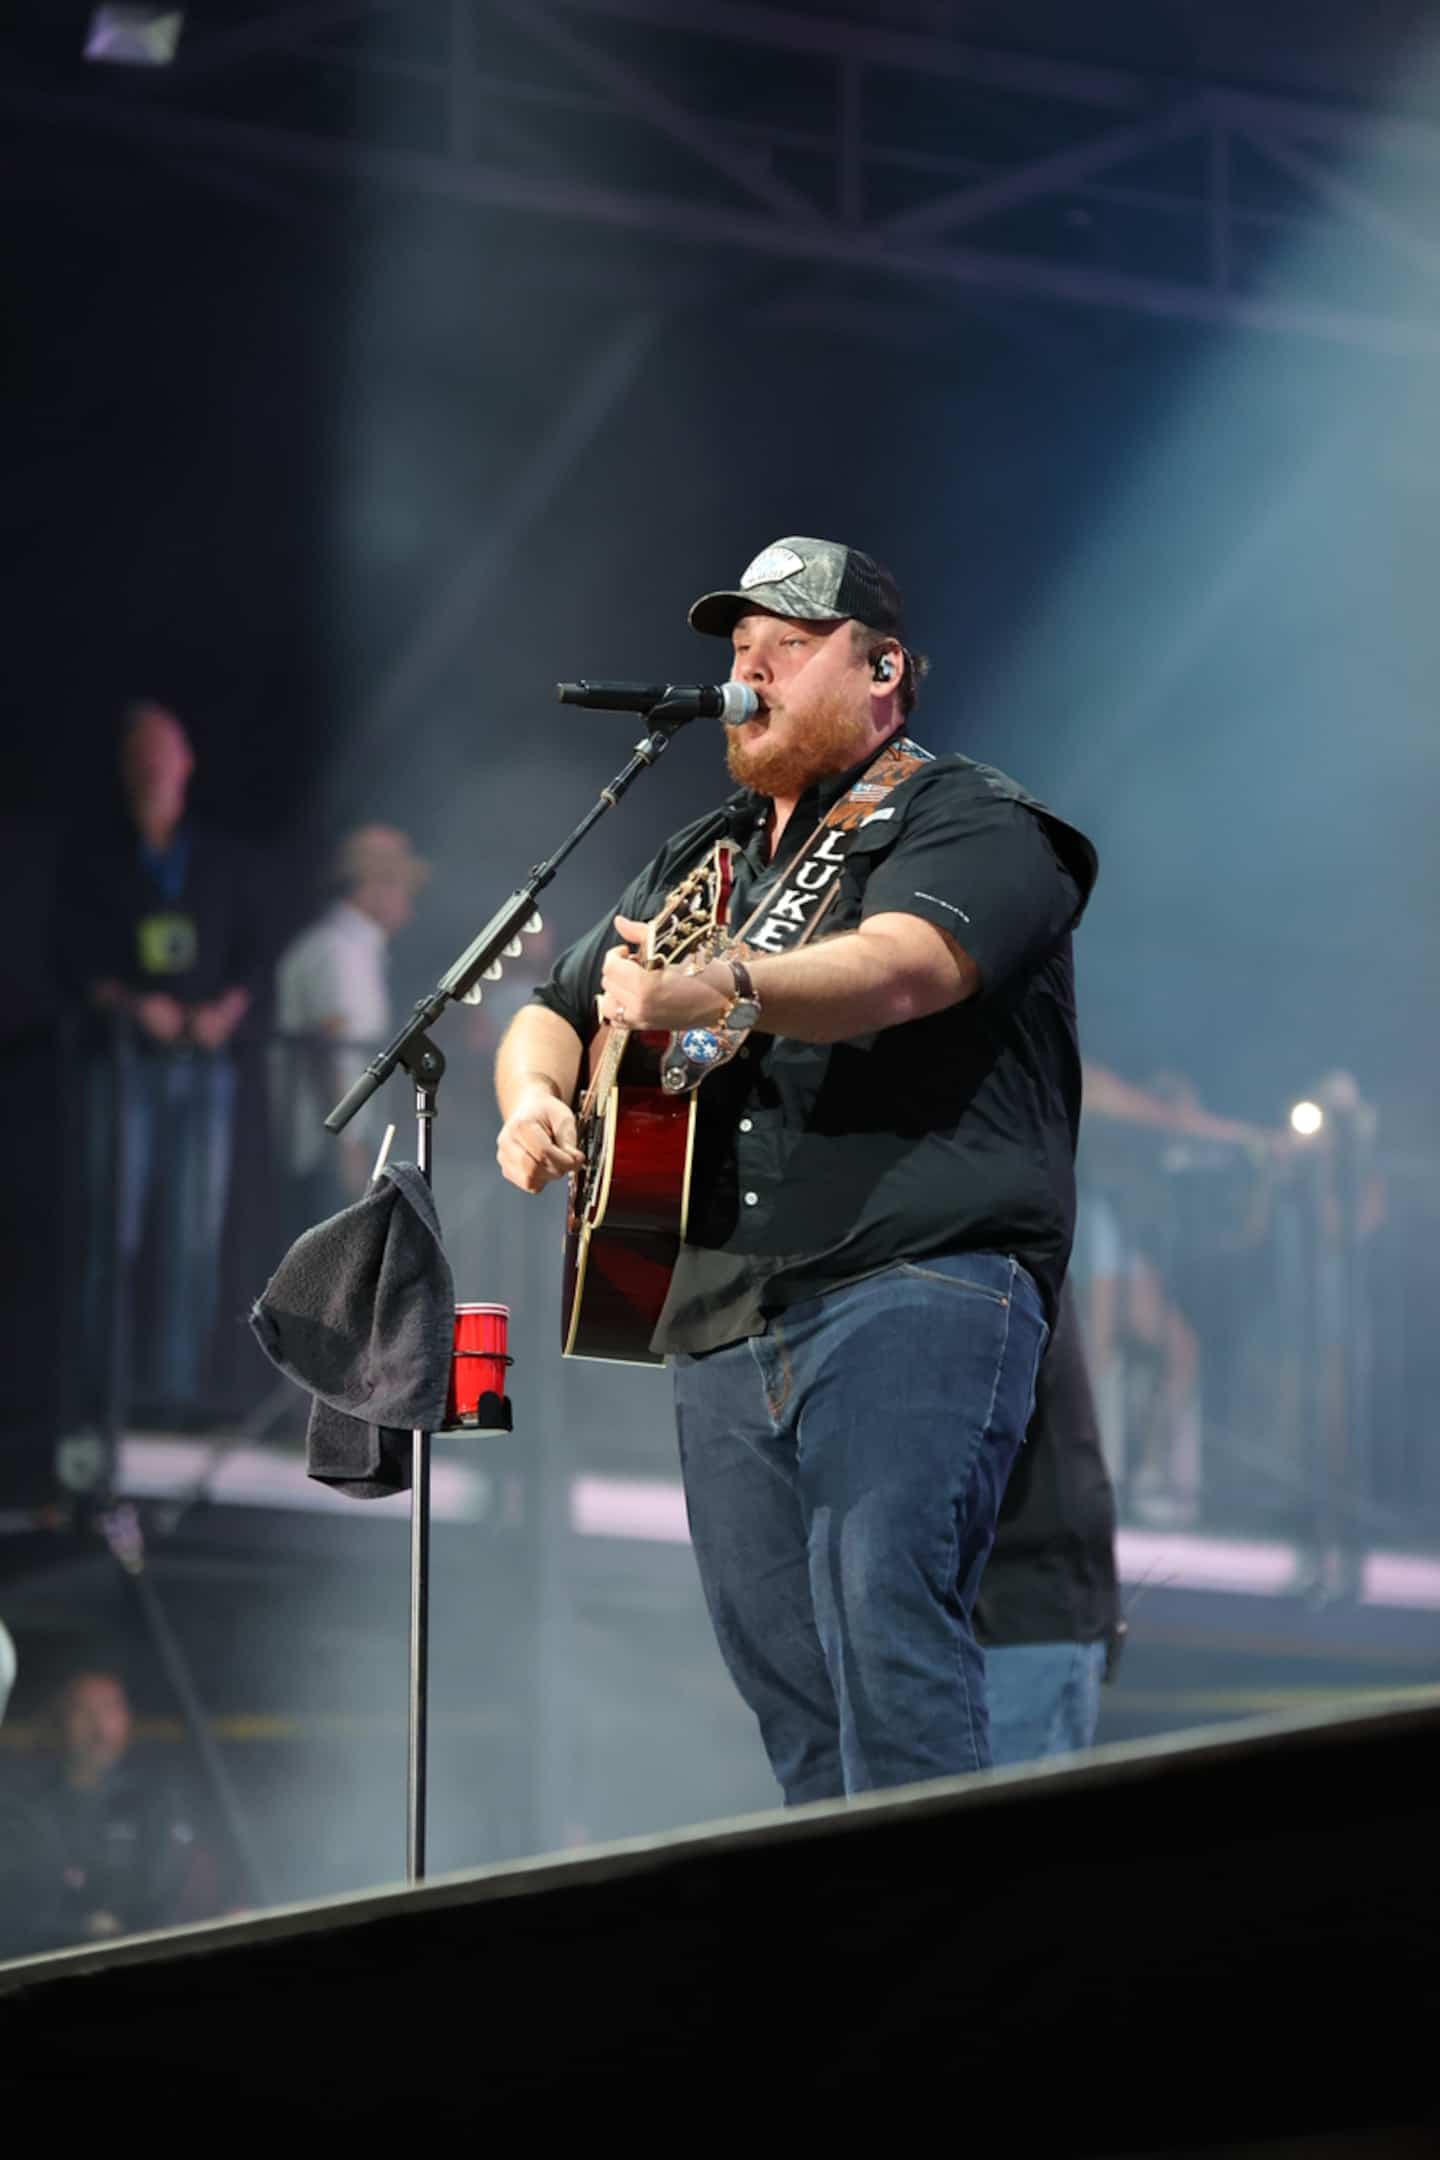 Luke Combs at the FEQ: A rarely seen country fever